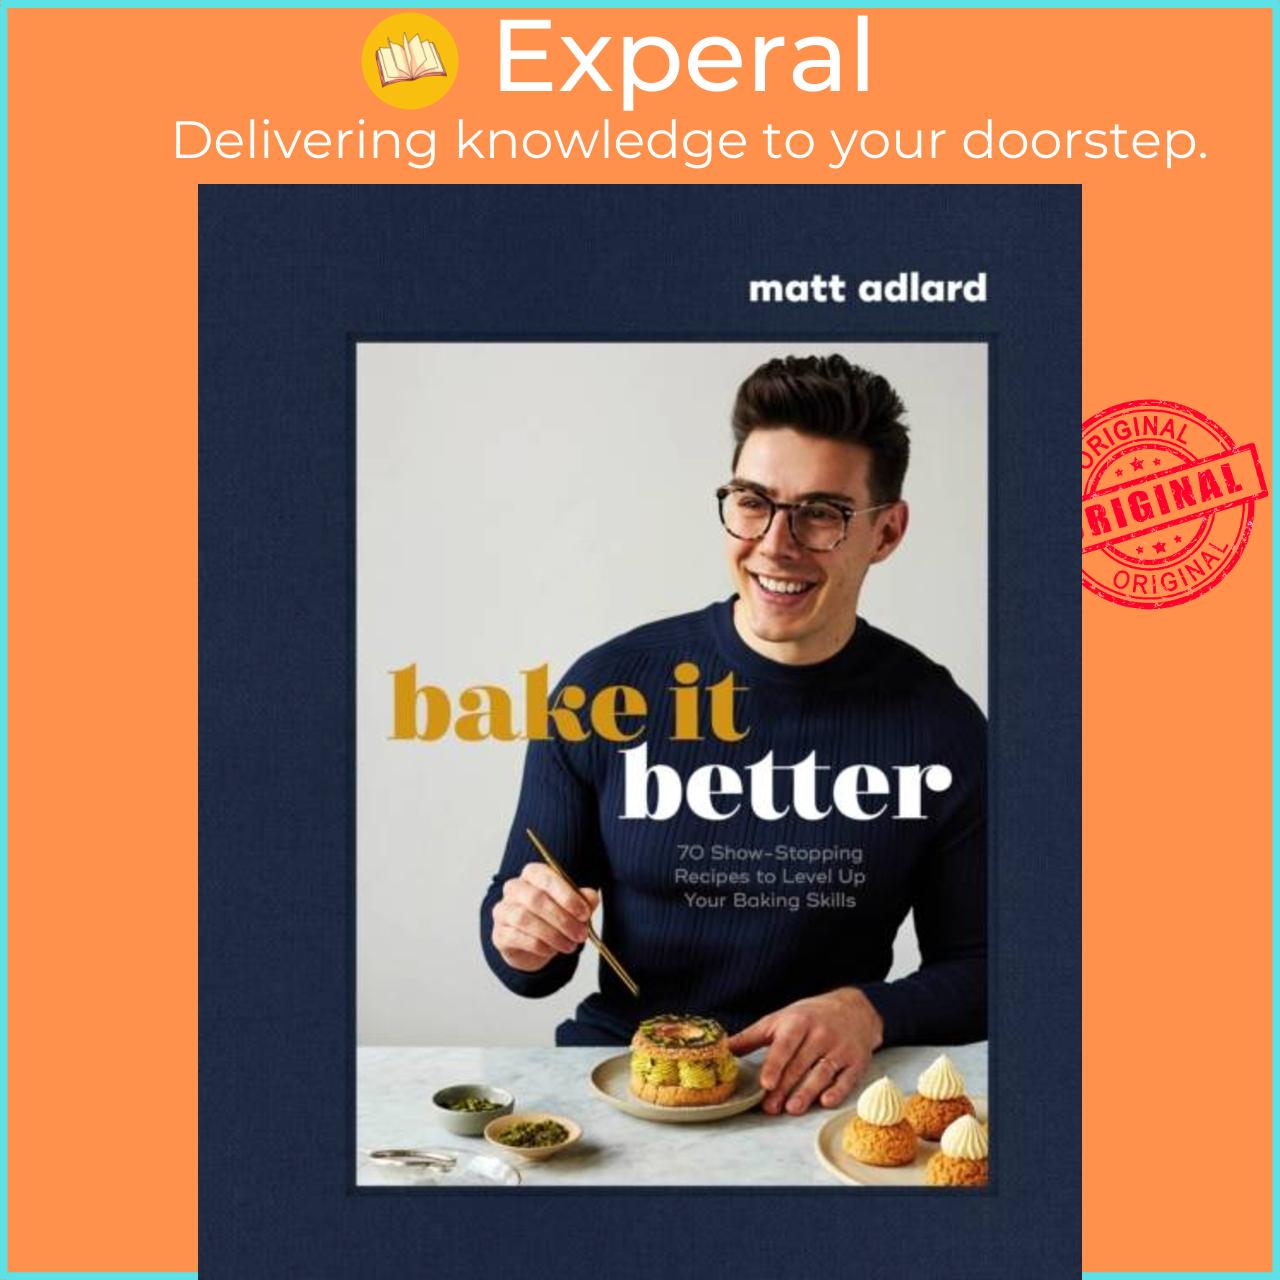 Sách - Bake It Better - 70 Show-Stopping Recipes to Level Up Your Baking Skills by Matt Adlard (UK edition, hardcover)